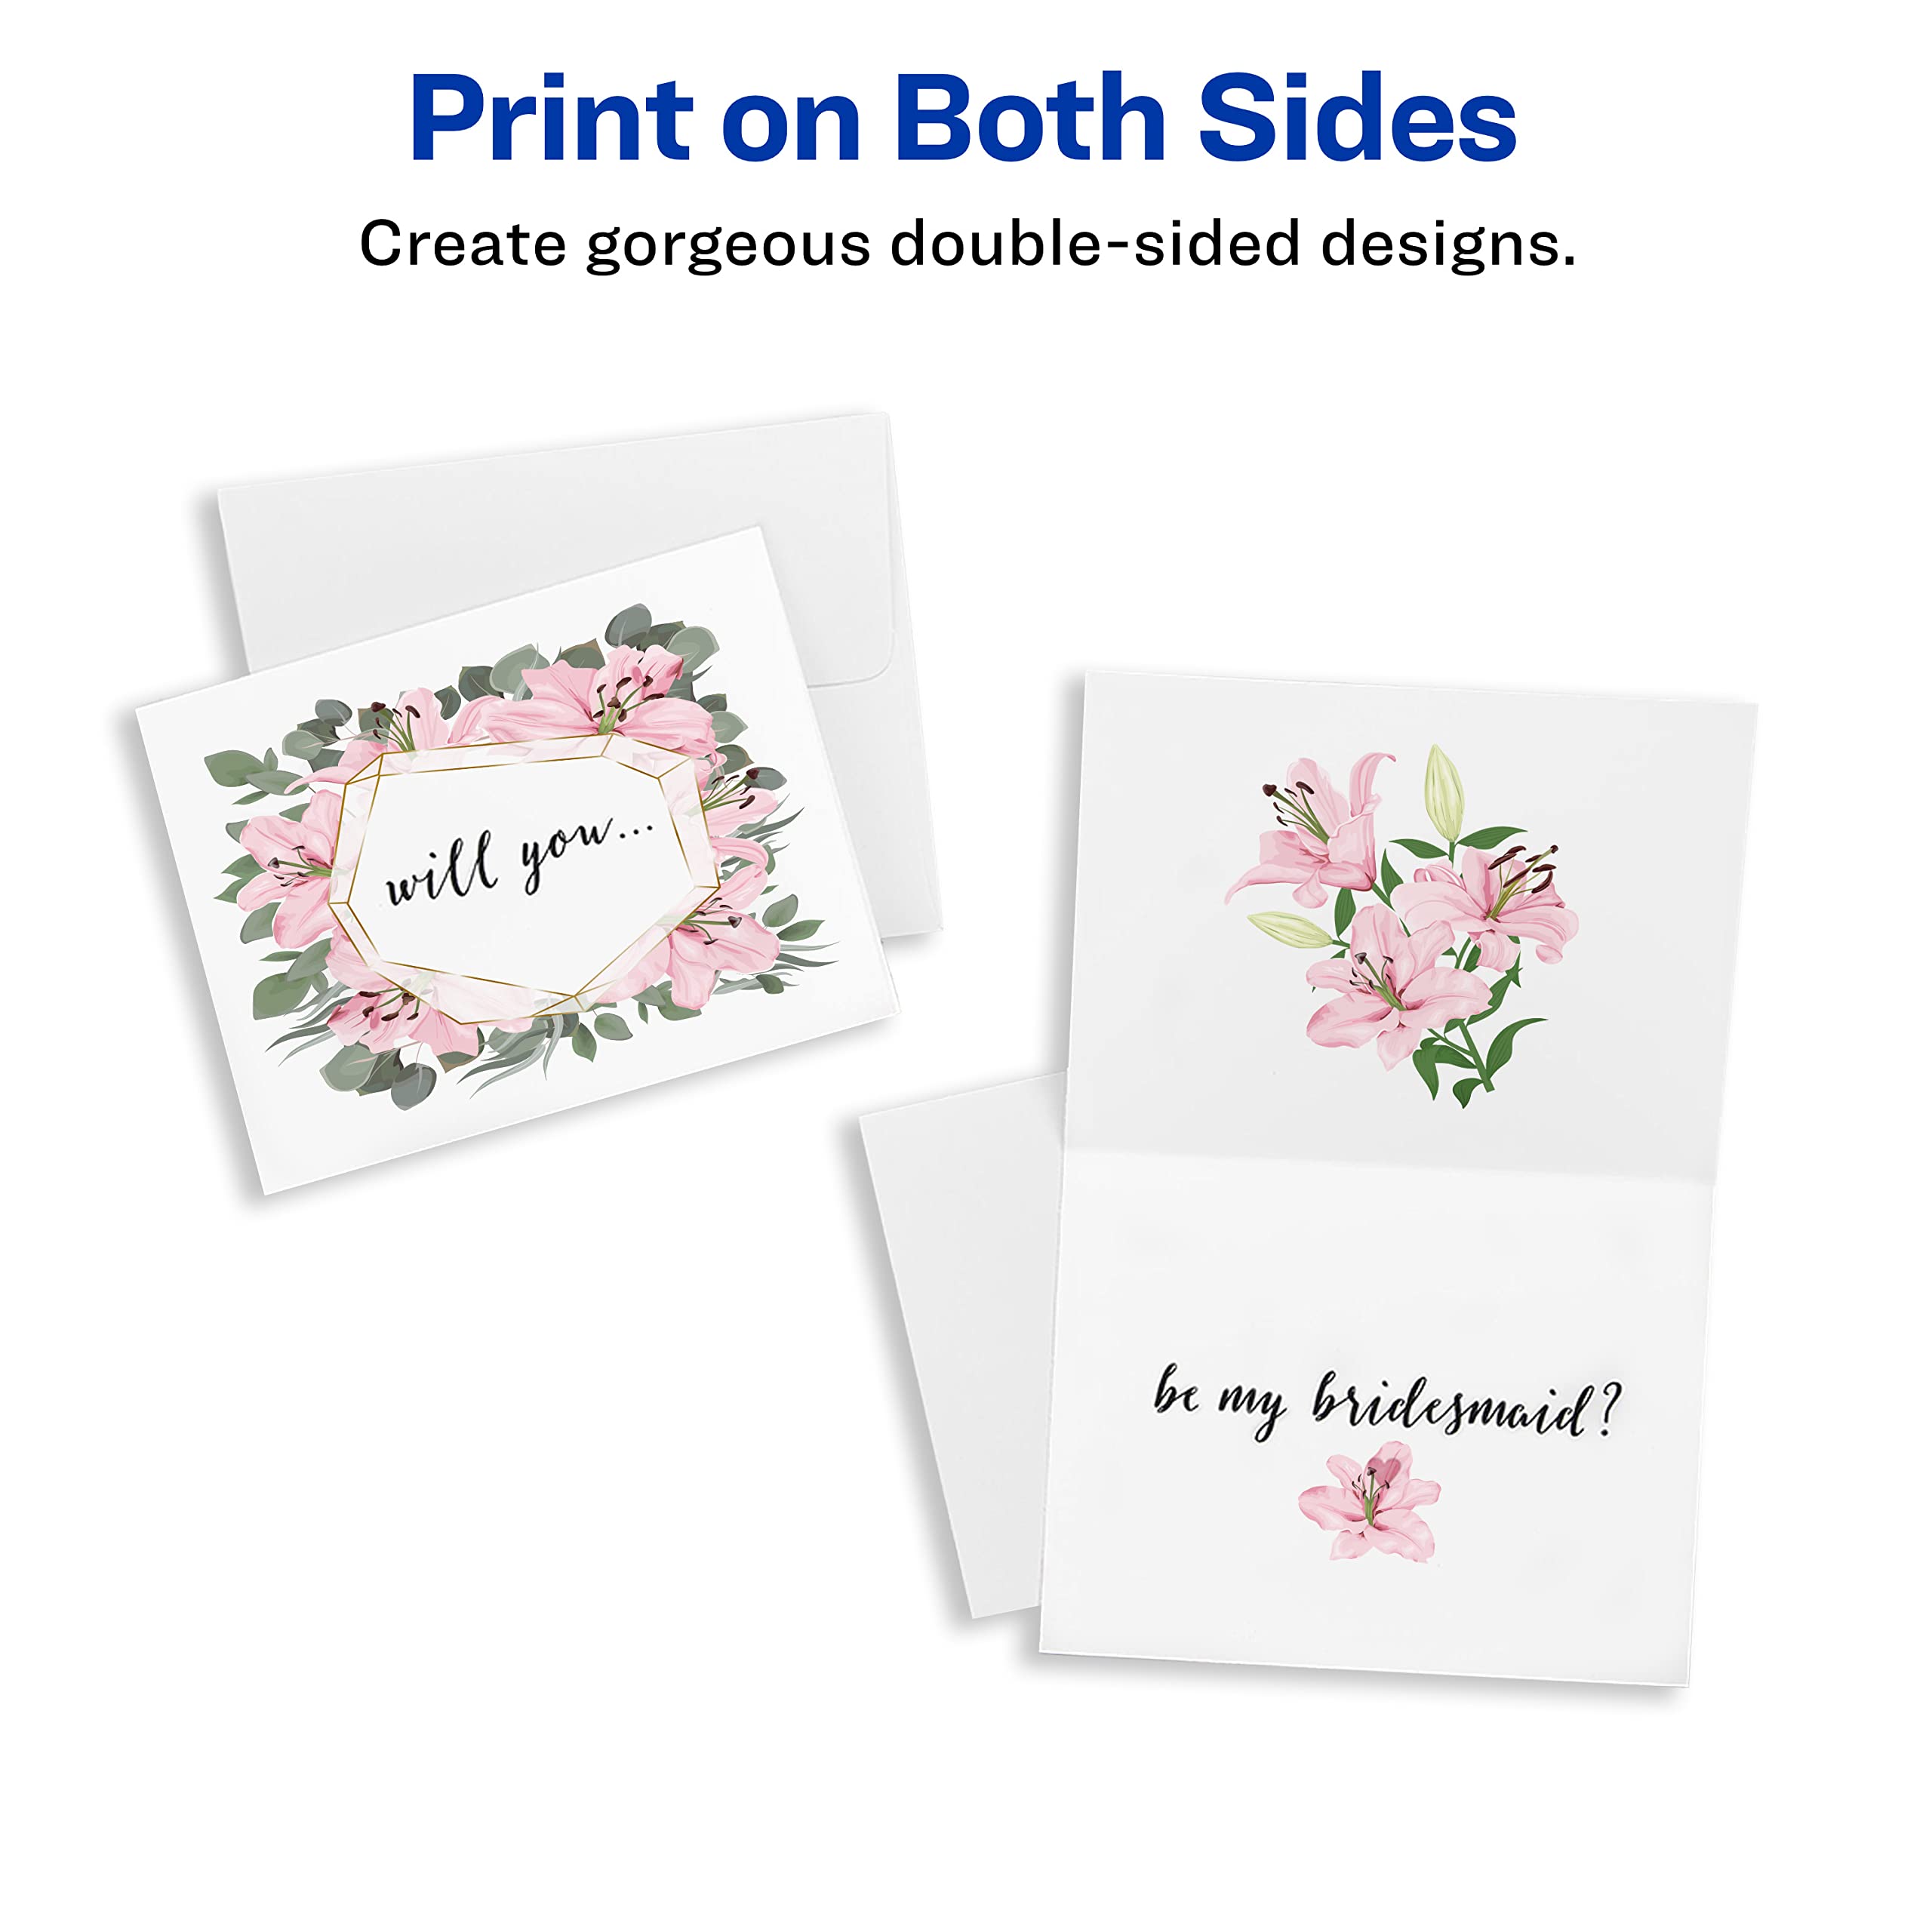 Avery Printable Note Cards, Laser Printers, 60 Cards and Envelopes, 4.25 x 5.5 (5315)